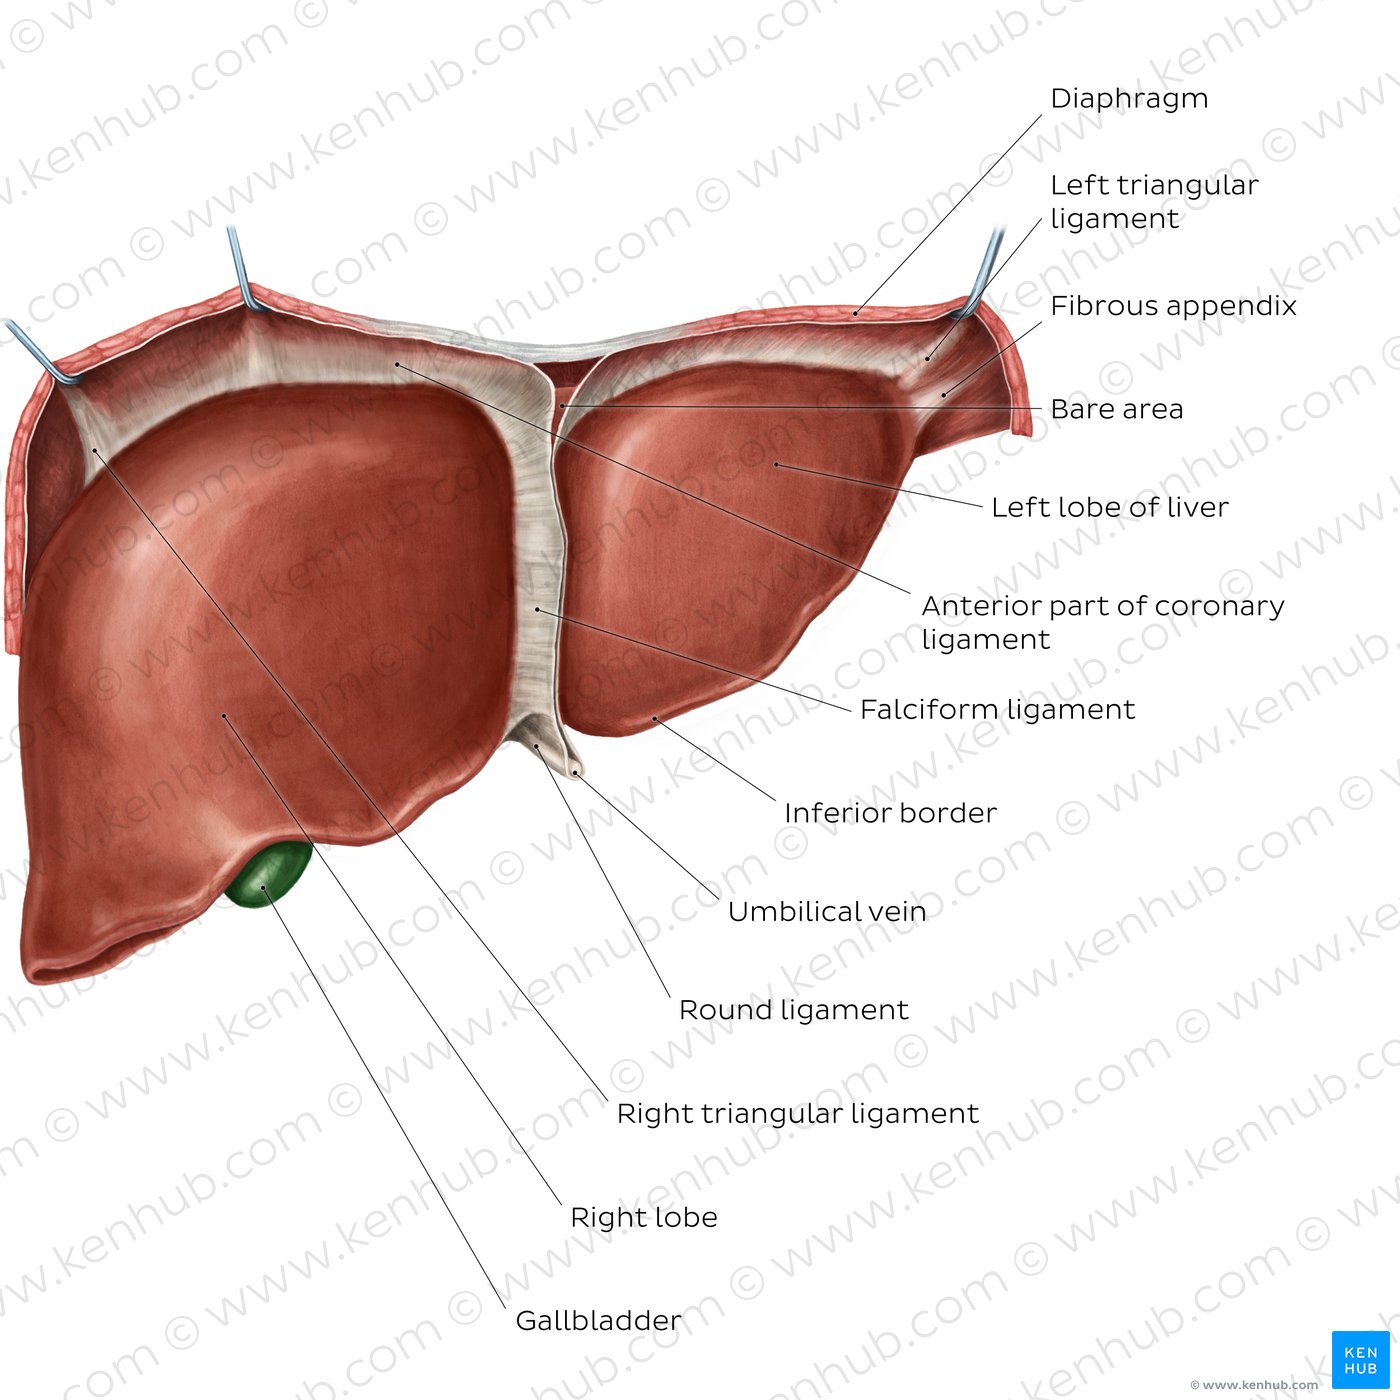 Anterior view of the liver